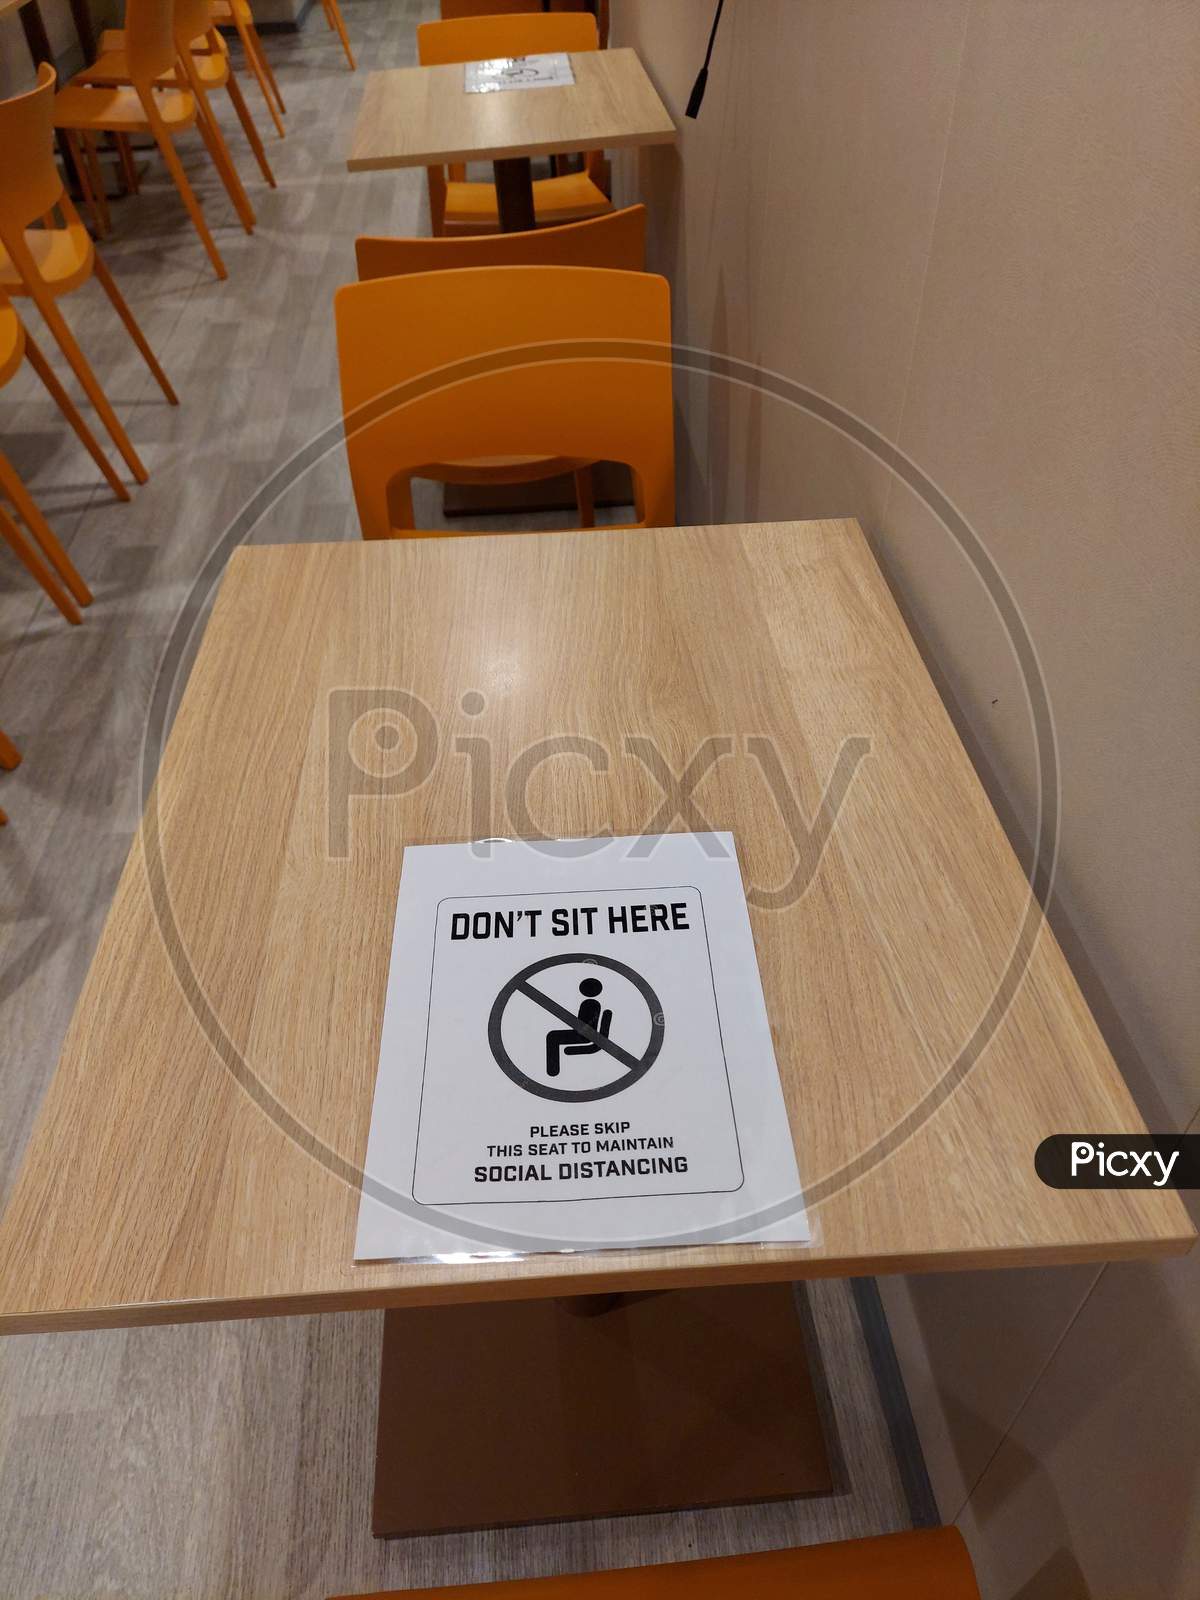 Do Not Sit Sign On A Table Due To Covid-19 To Ensure Social Distancing